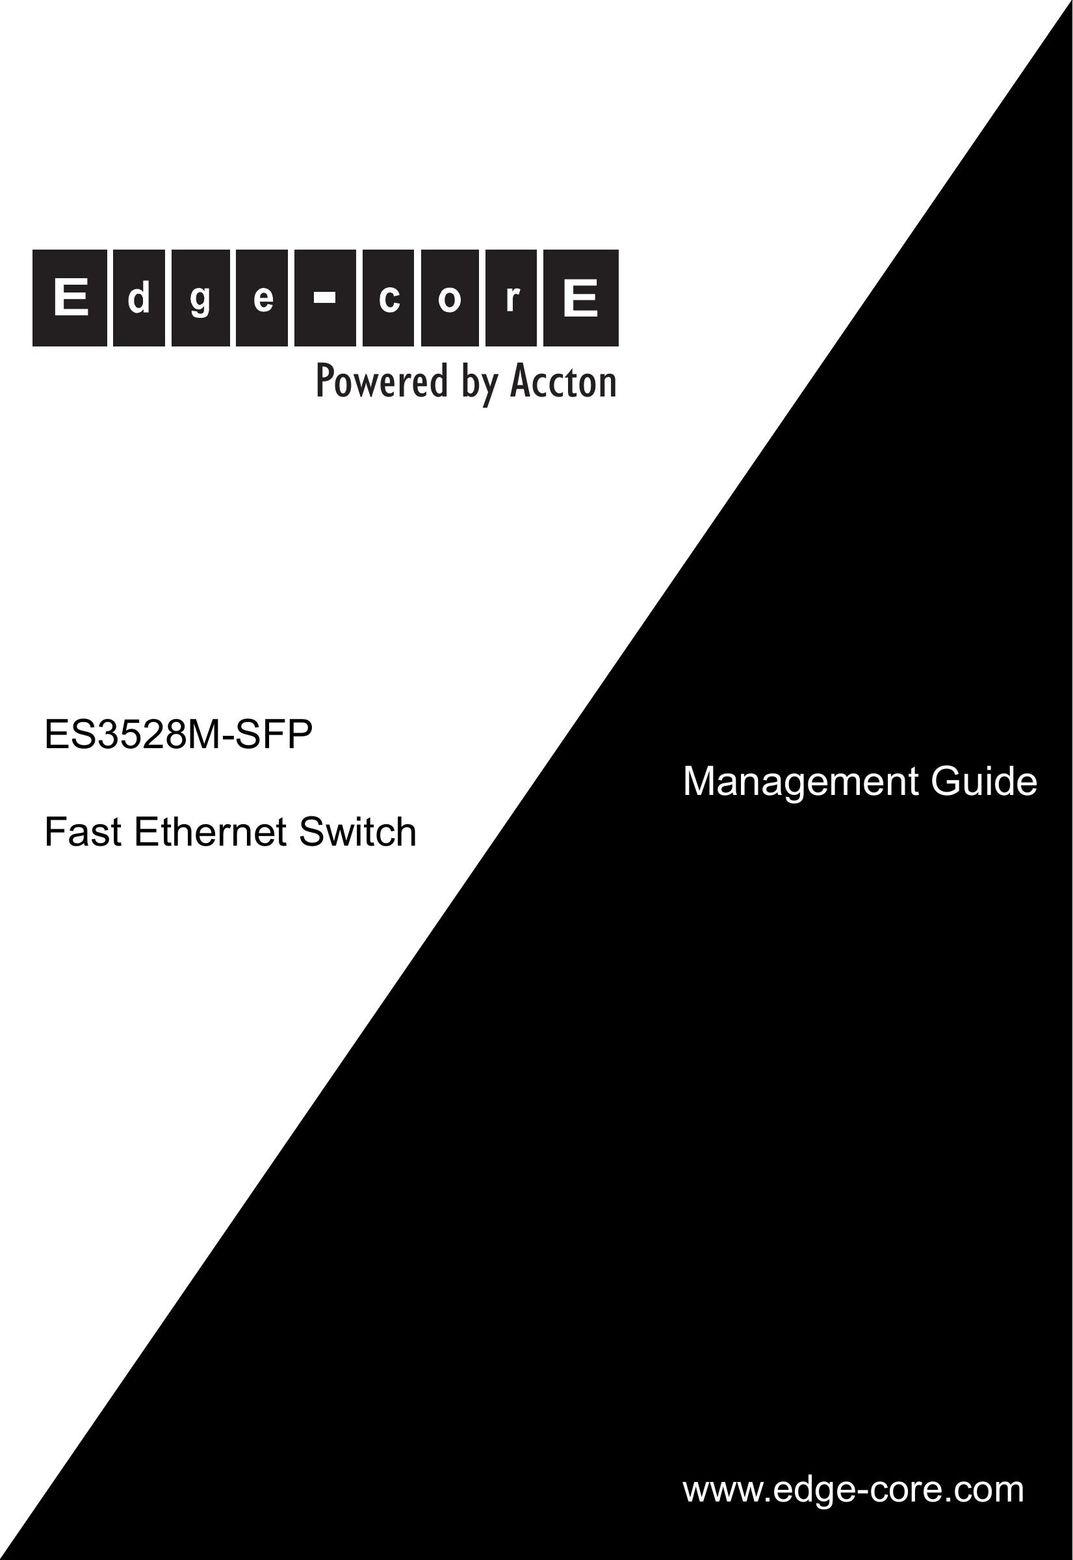 Accton Technology ES3528M-SFP Switch User Manual